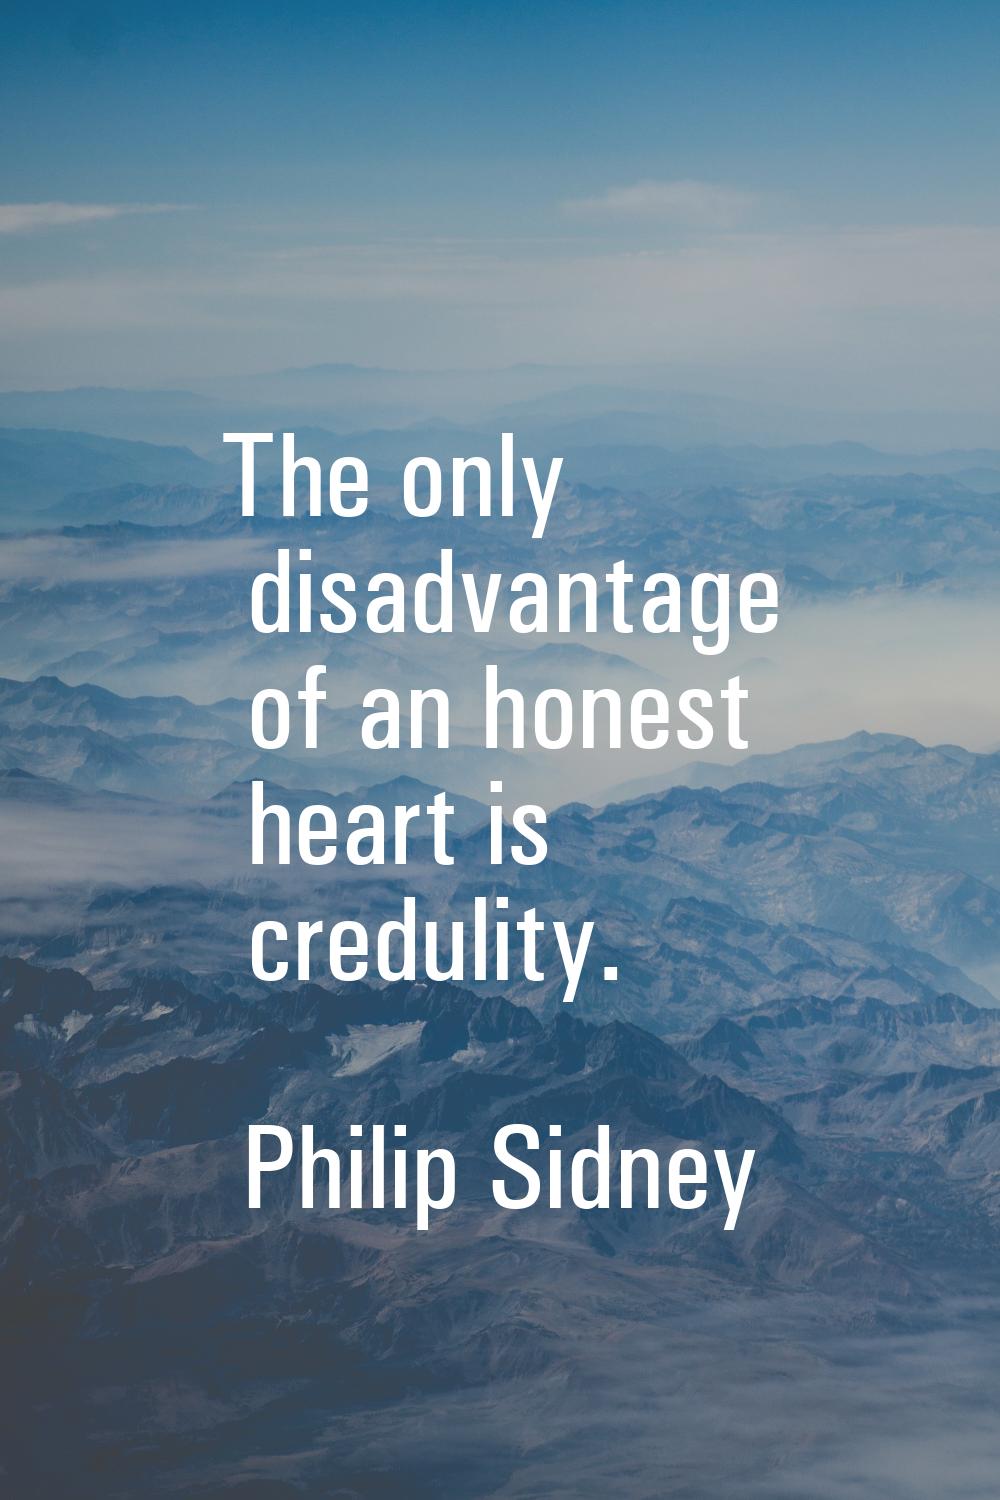 The only disadvantage of an honest heart is credulity.